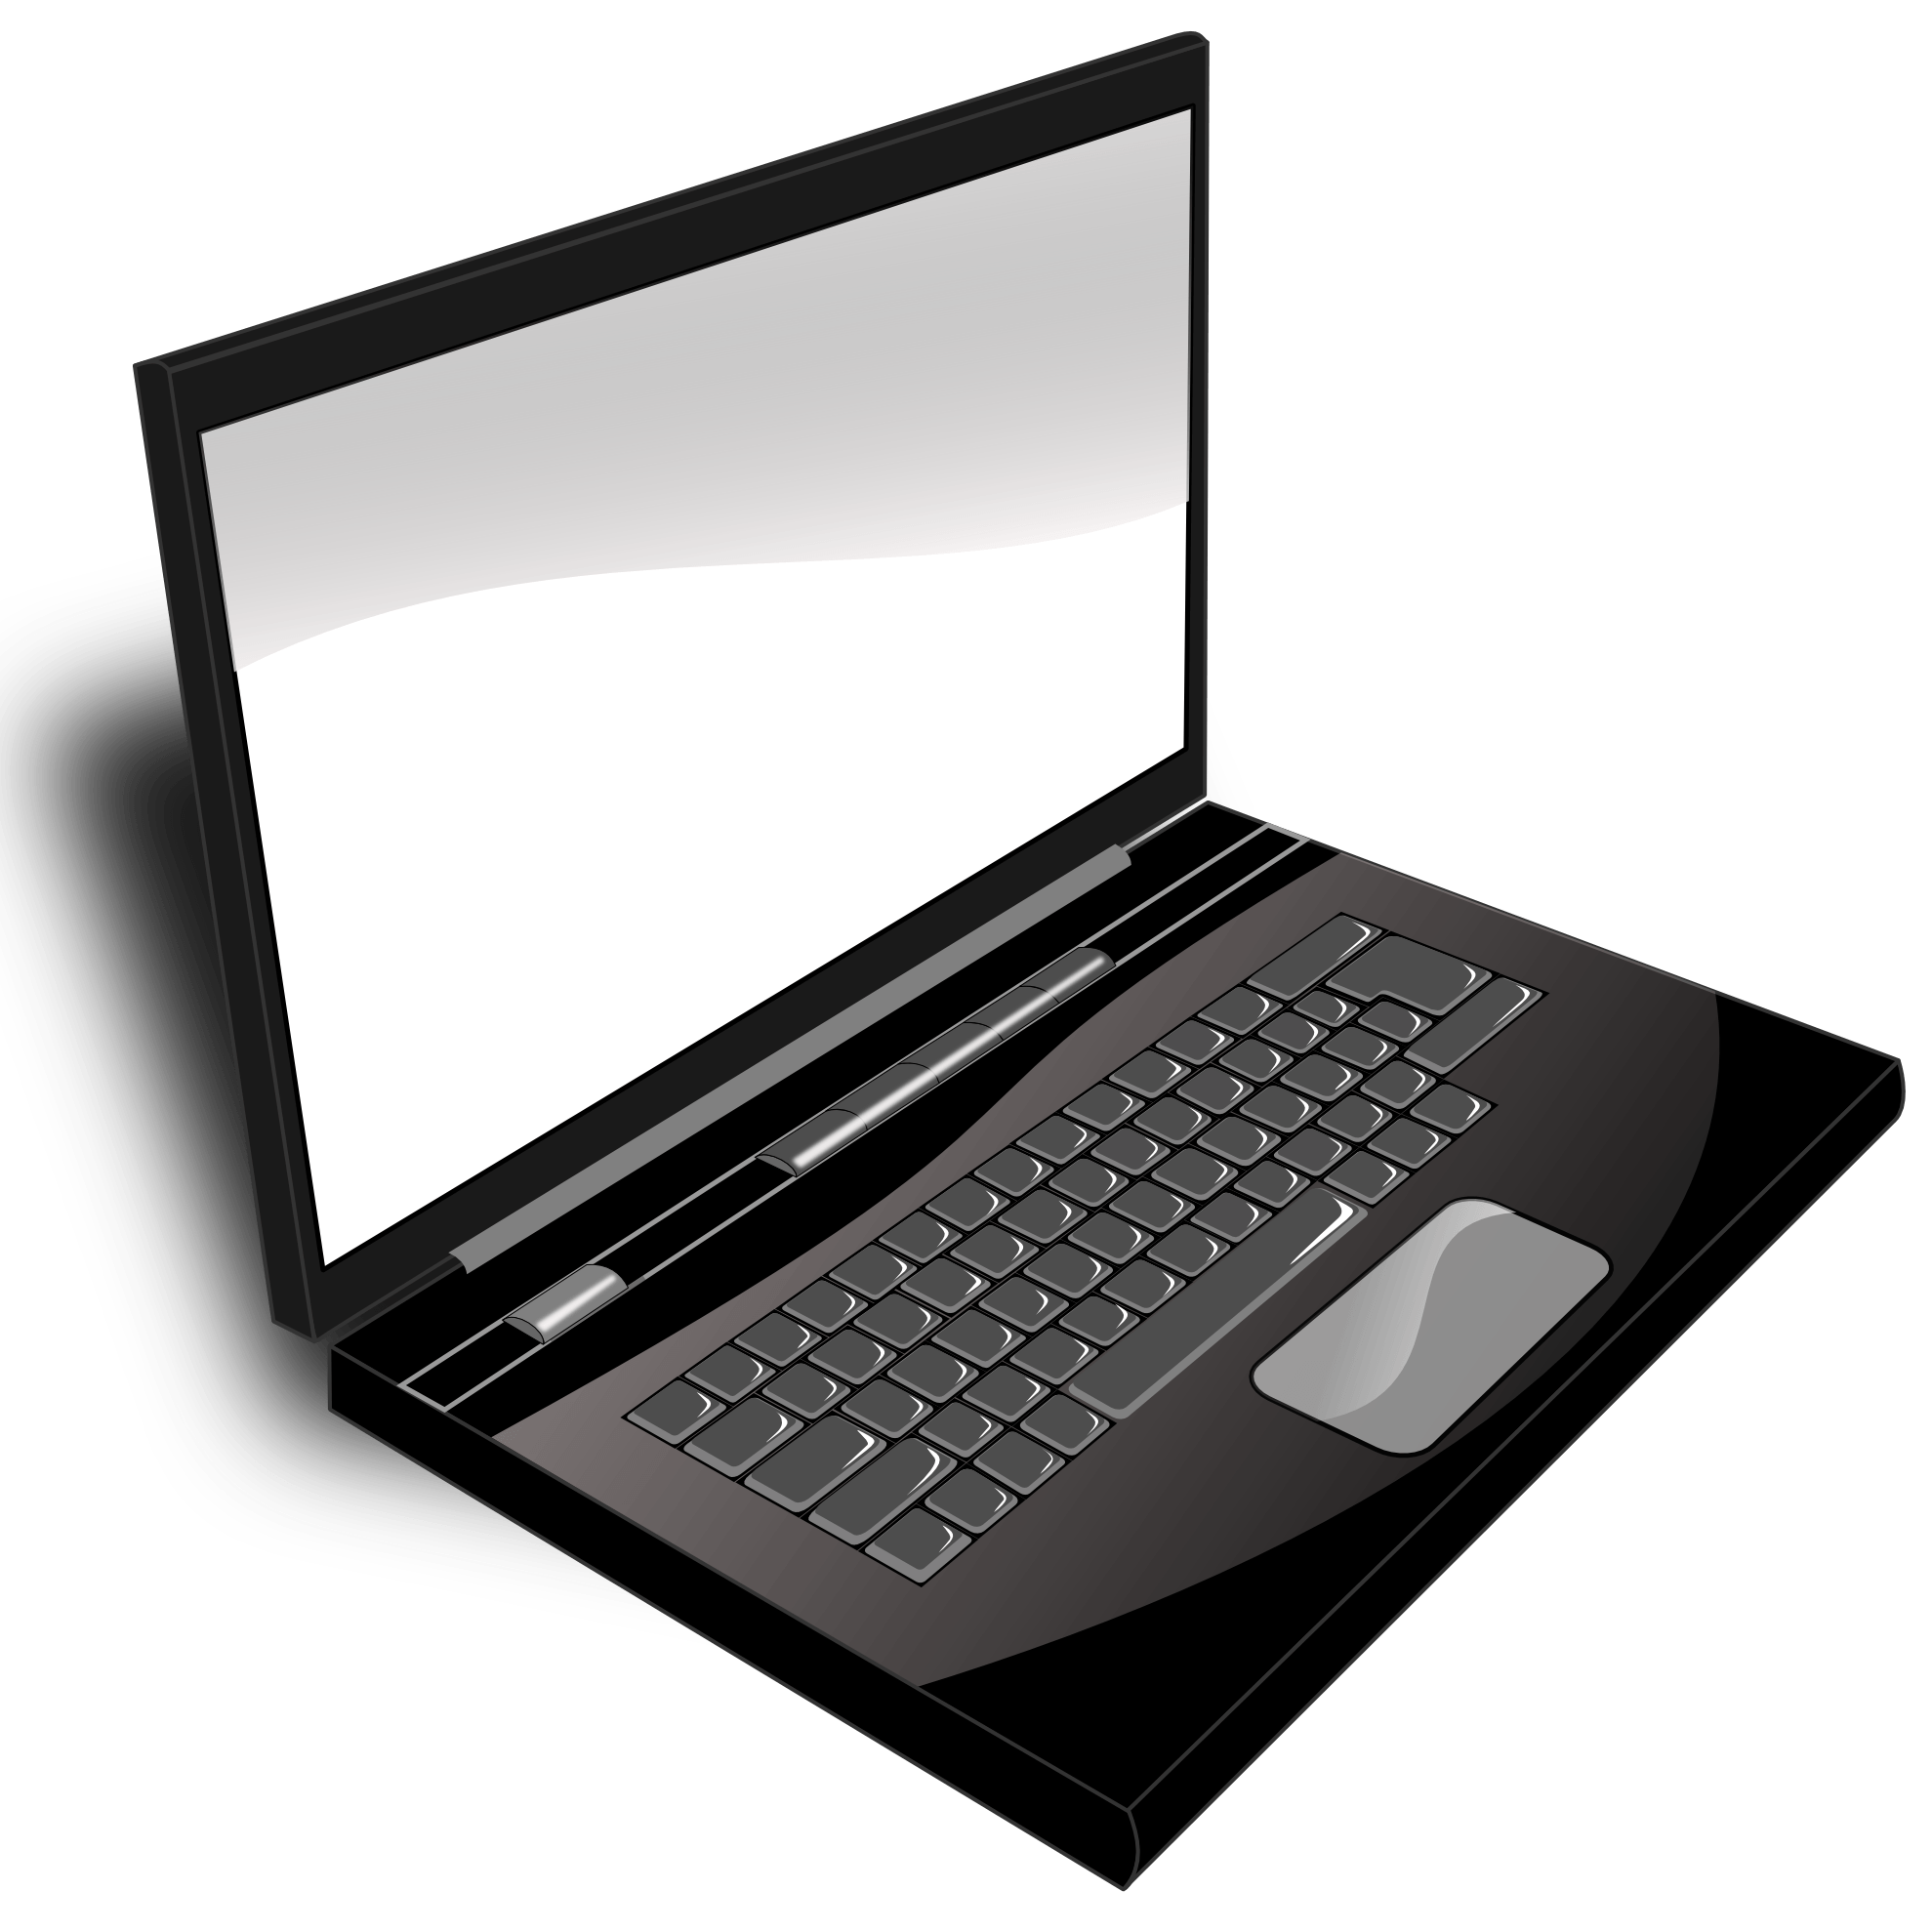 Free Computer Clipart Transparent Background, Download Free.